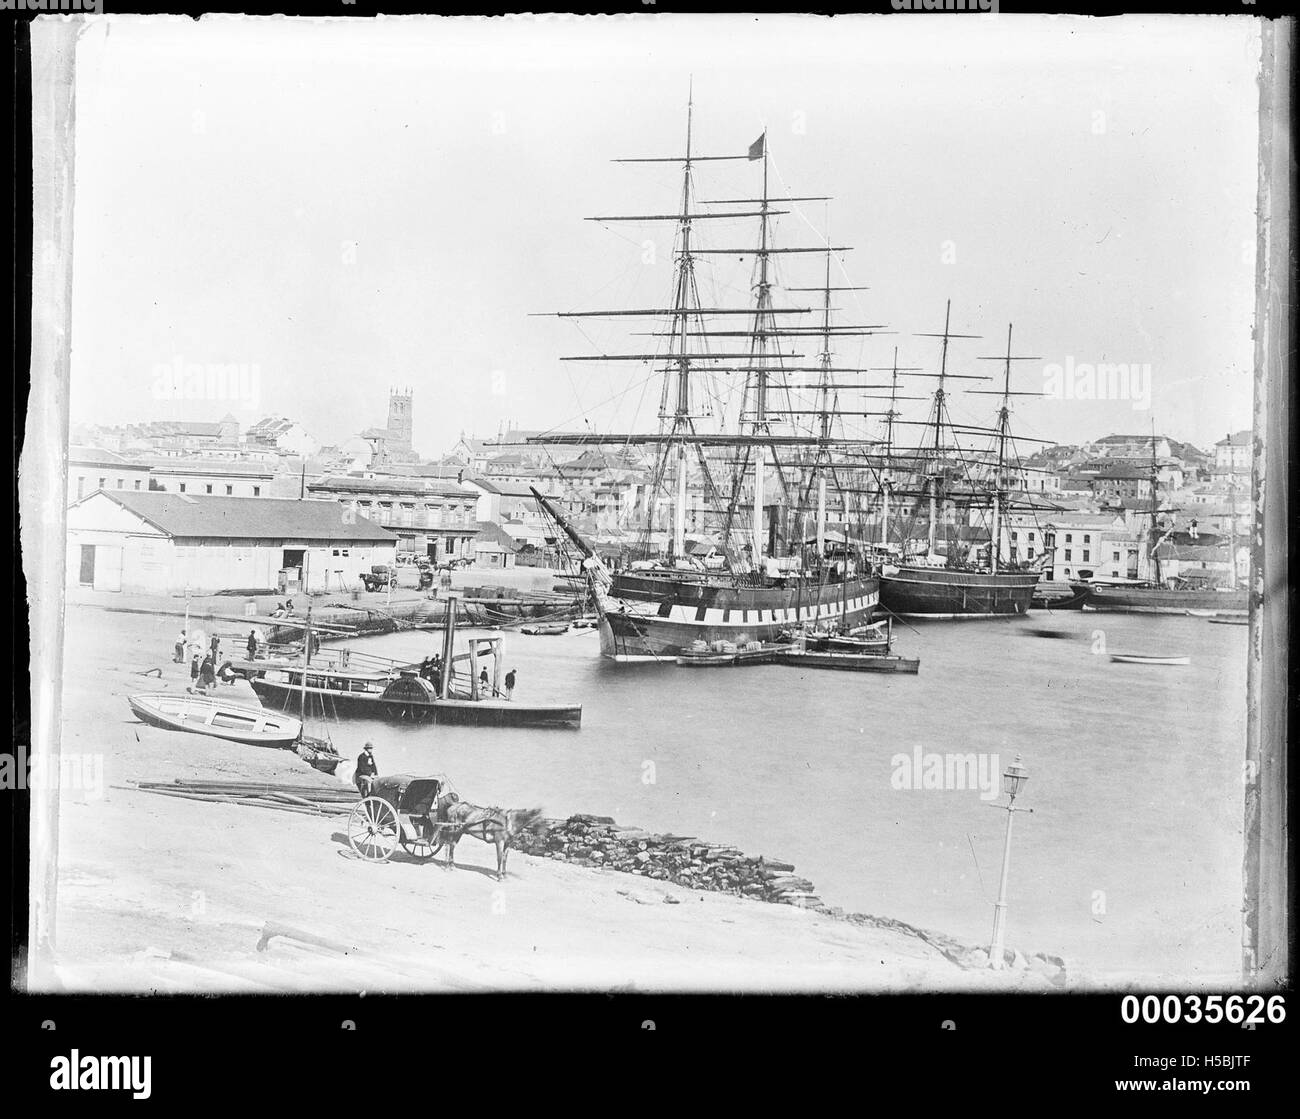 Paddle wheel ferry WARATAH, sailing ship GREAT VICTORIA and other ...